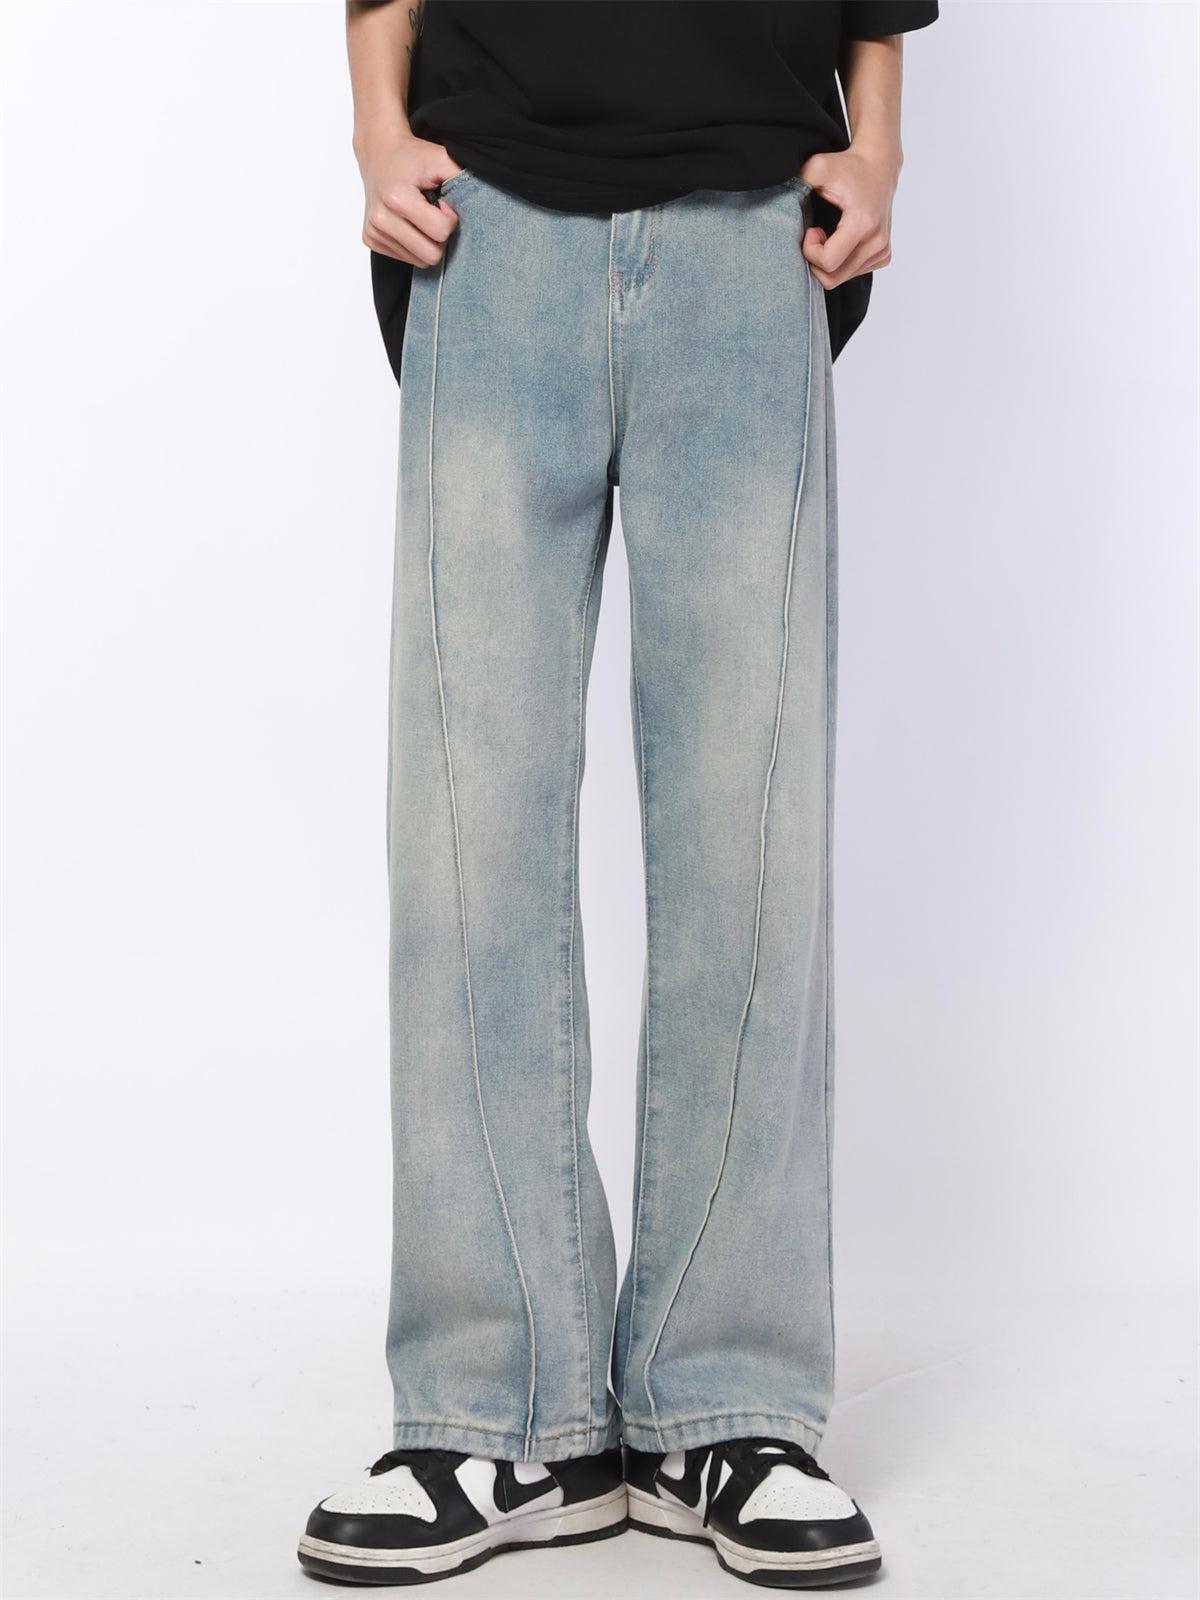 Light Washed Line Pleated Jeans Korean Street Fashion Jeans By Made Extreme Shop Online at OH Vault